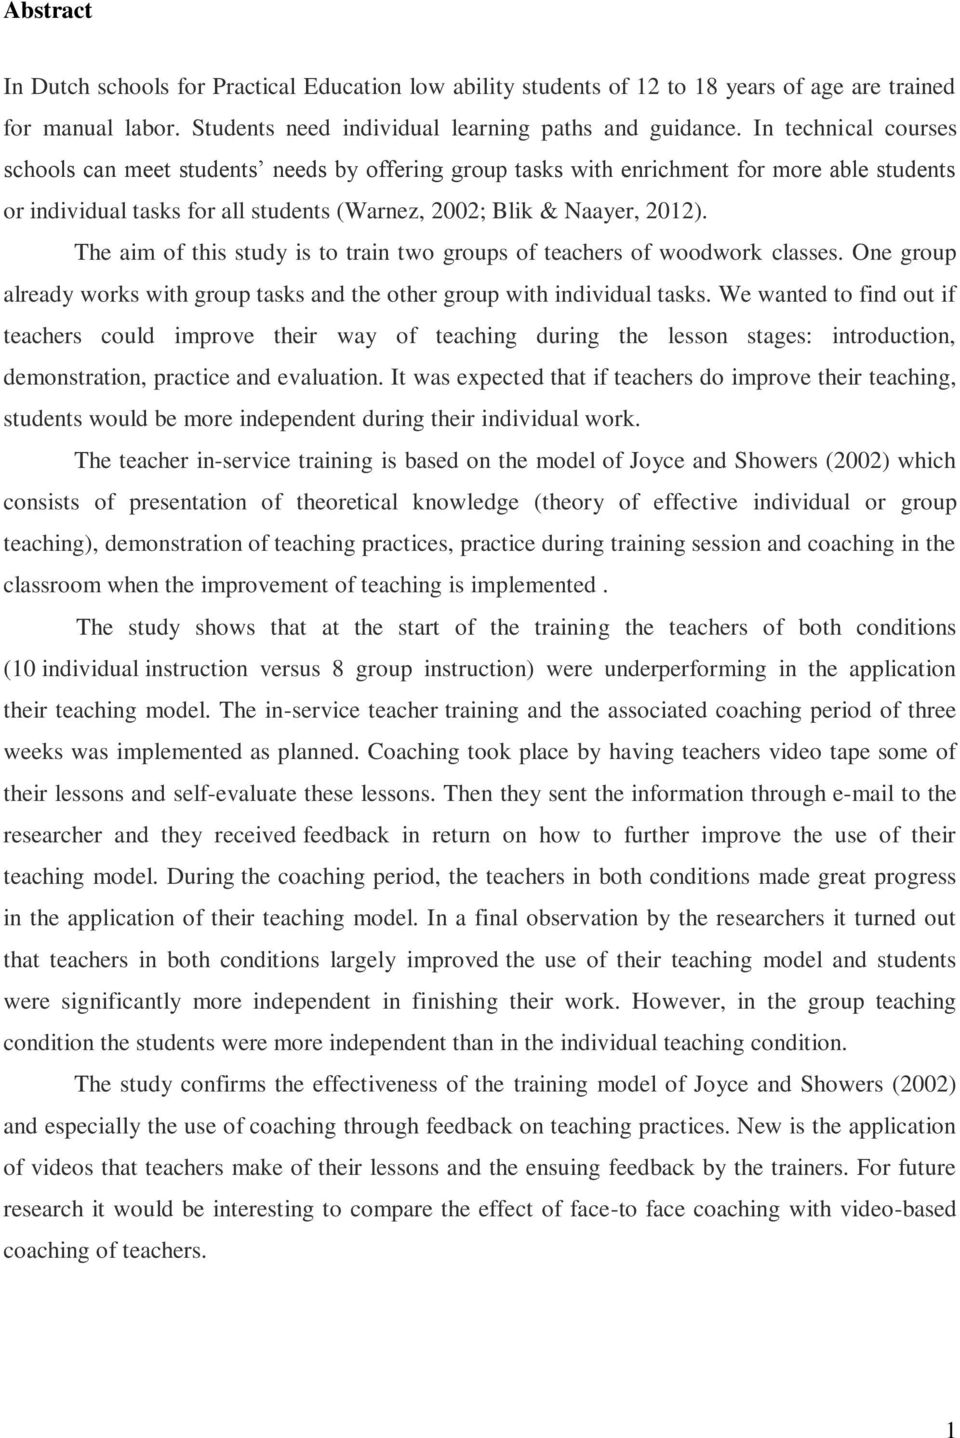 The aim of this study is to train two groups of teachers of woodwork classes. One group already works with group tasks and the other group with individual tasks.